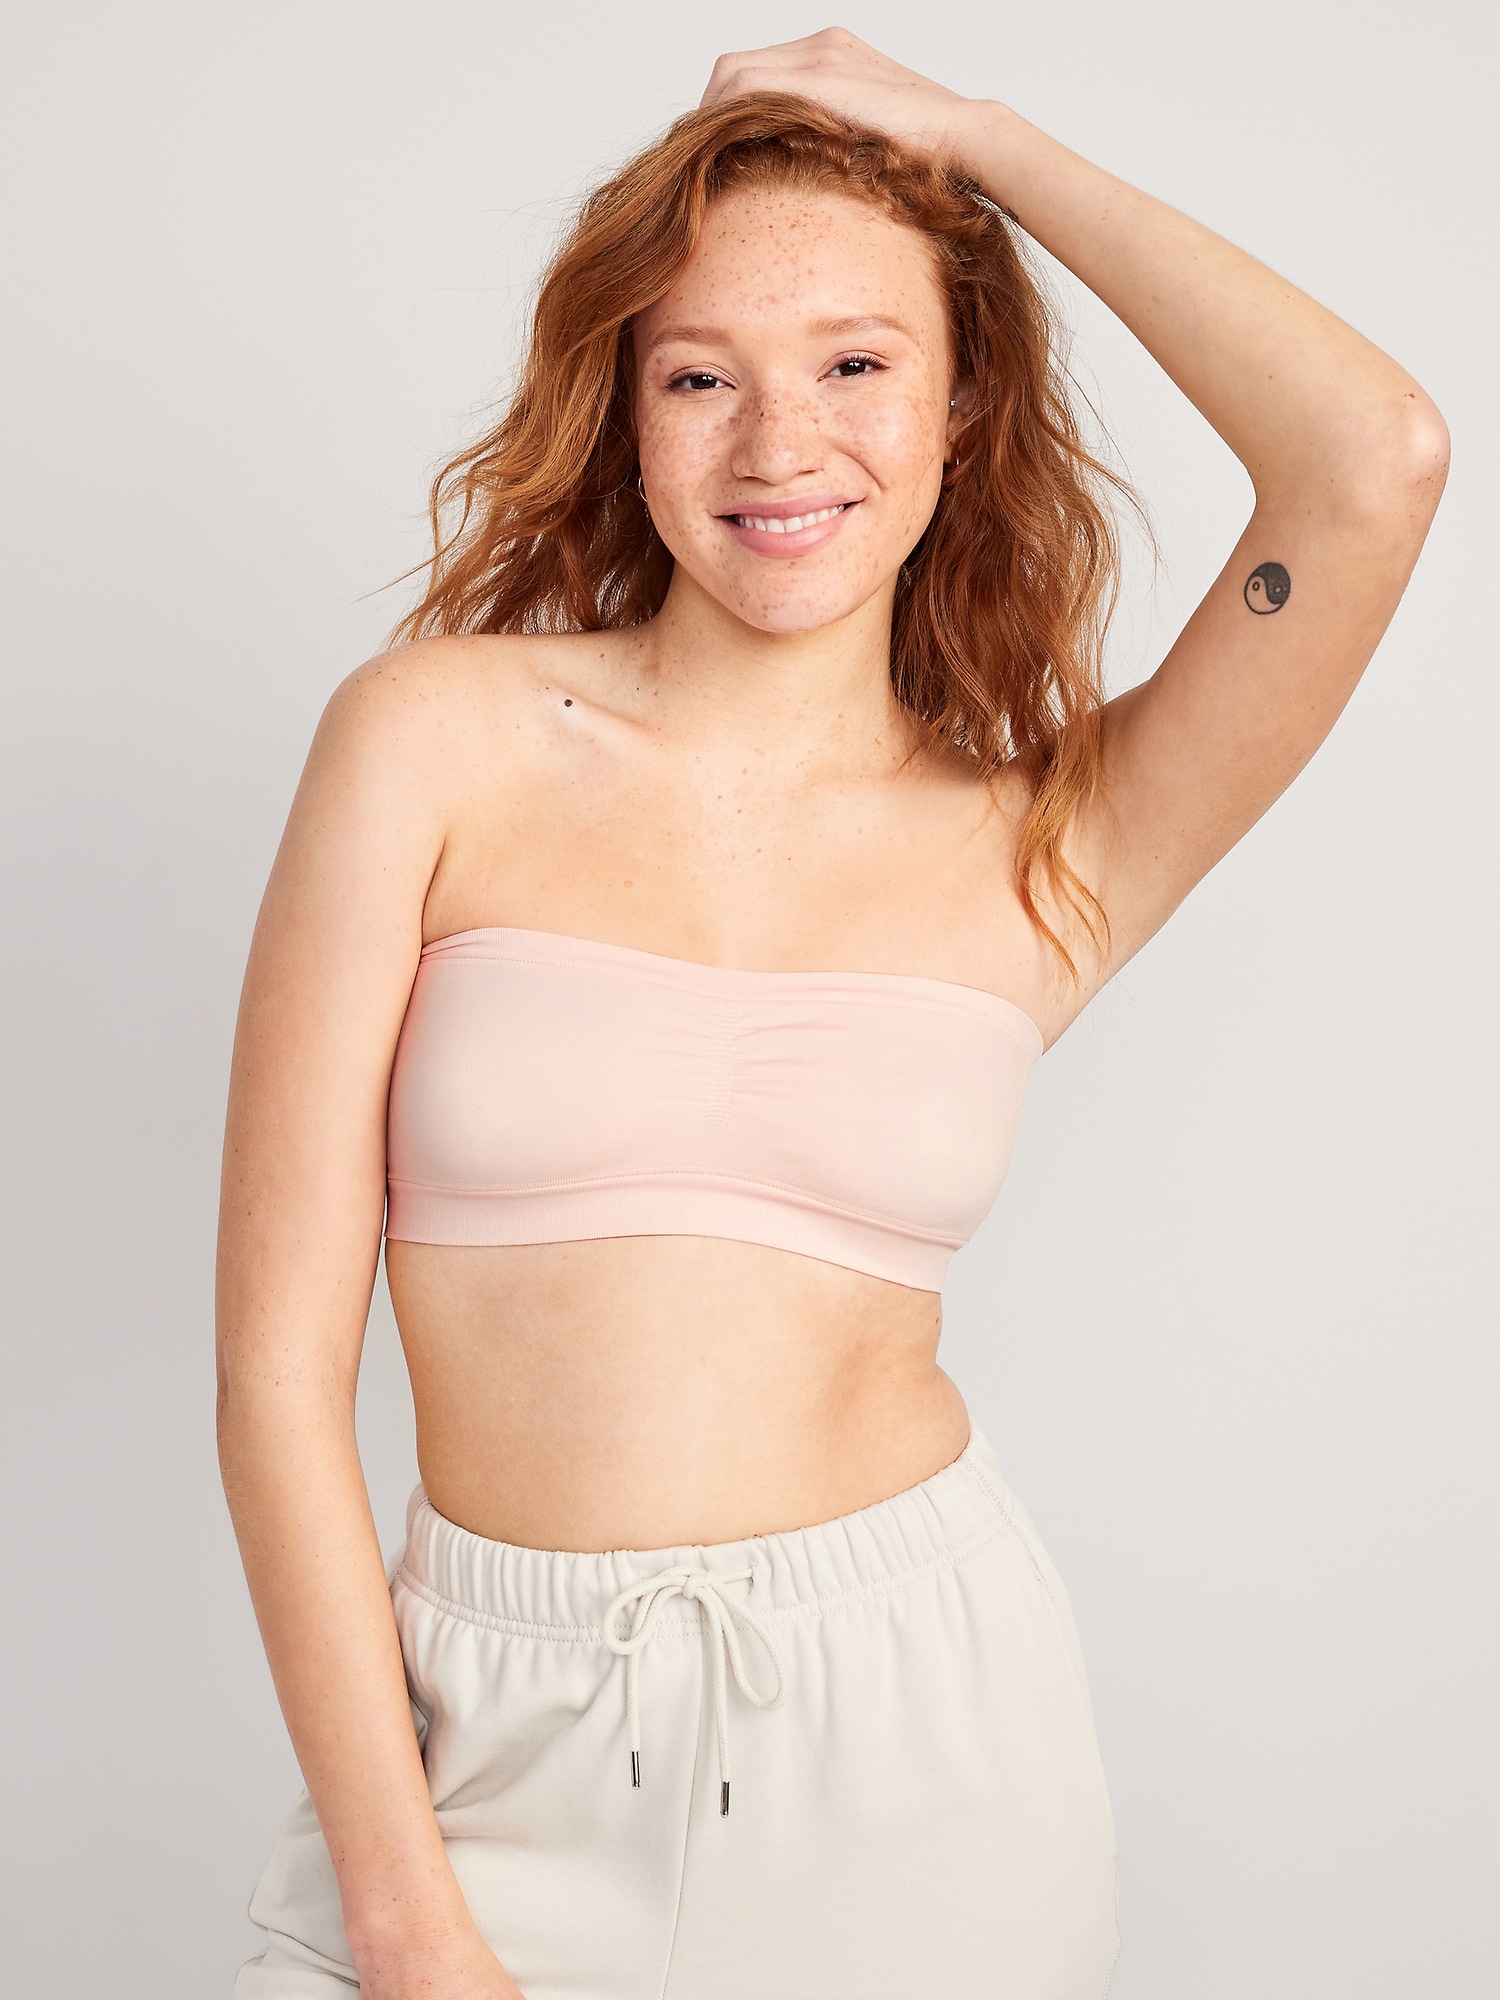 Old Navy - Rib-Knit Seamless Bandeau Bralette Top for Women pink